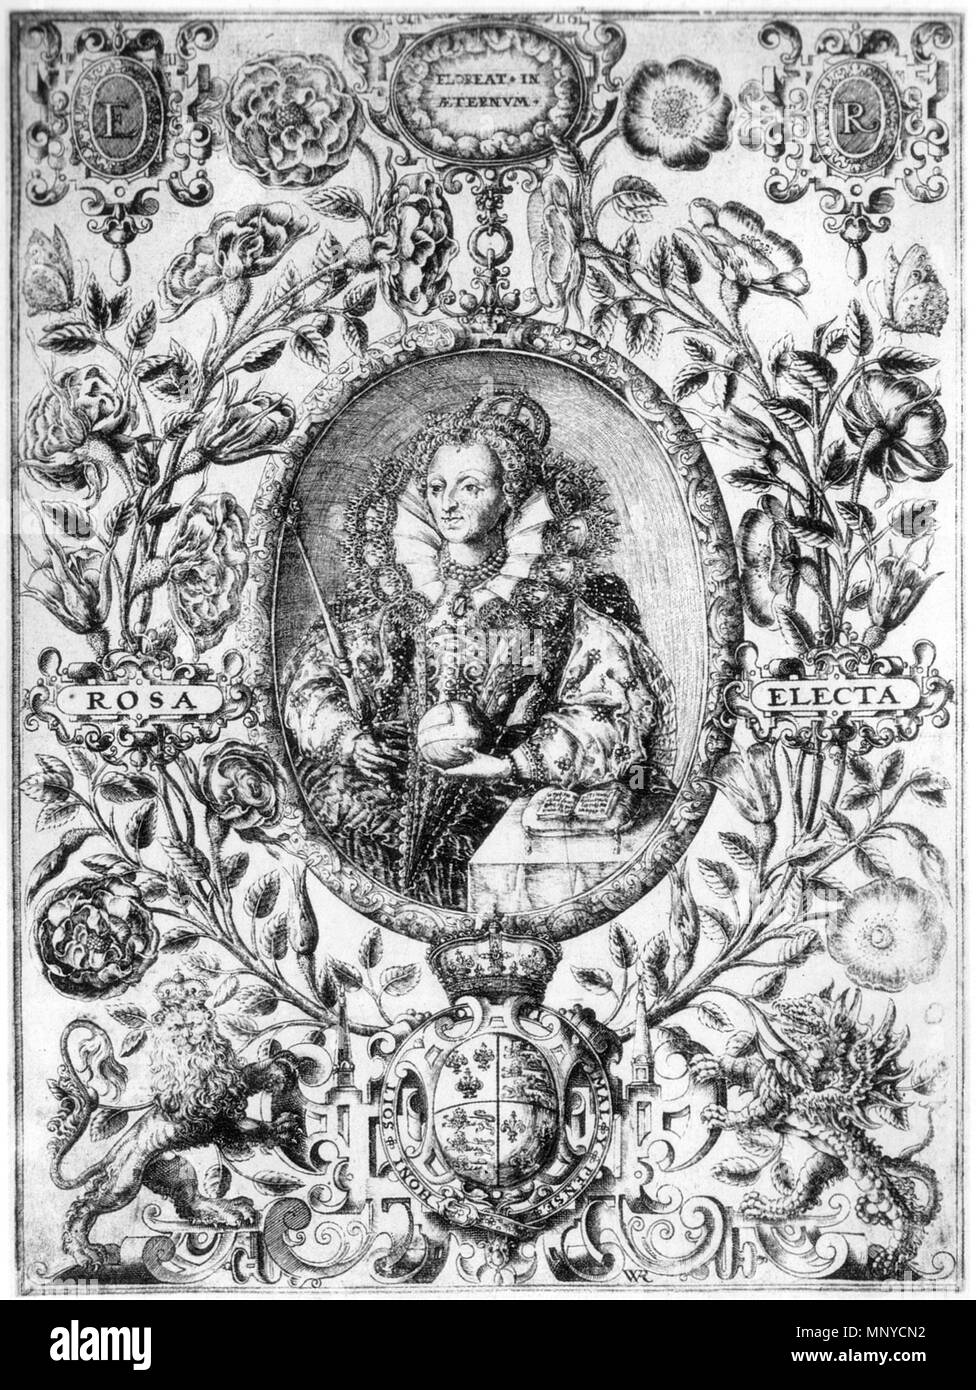 . Elizabeth I of England as Rosa Electa flanked by the Tudor Rose (left) and eglantine (her device) . between 1590 and 1595.   William Rogers  (1545–1604)    Alternative names William i Rogers  Description British engraver  Date of birth/death circa 1545 circa 1604  Work period between circa 1589 and circa 1604  Work location London  Authority control  : Q2580395 VIAF: 36779094 ISNI: 0000 0000 4888 3843 ULAN: 500027008 LCCN: nr92010537 SUDOC: 15531100X WorldCat    Engraving by William Rogers, probably after Isaac Oliver 1267 William Rogers Elizabeth I Rosa Electa Stock Photo